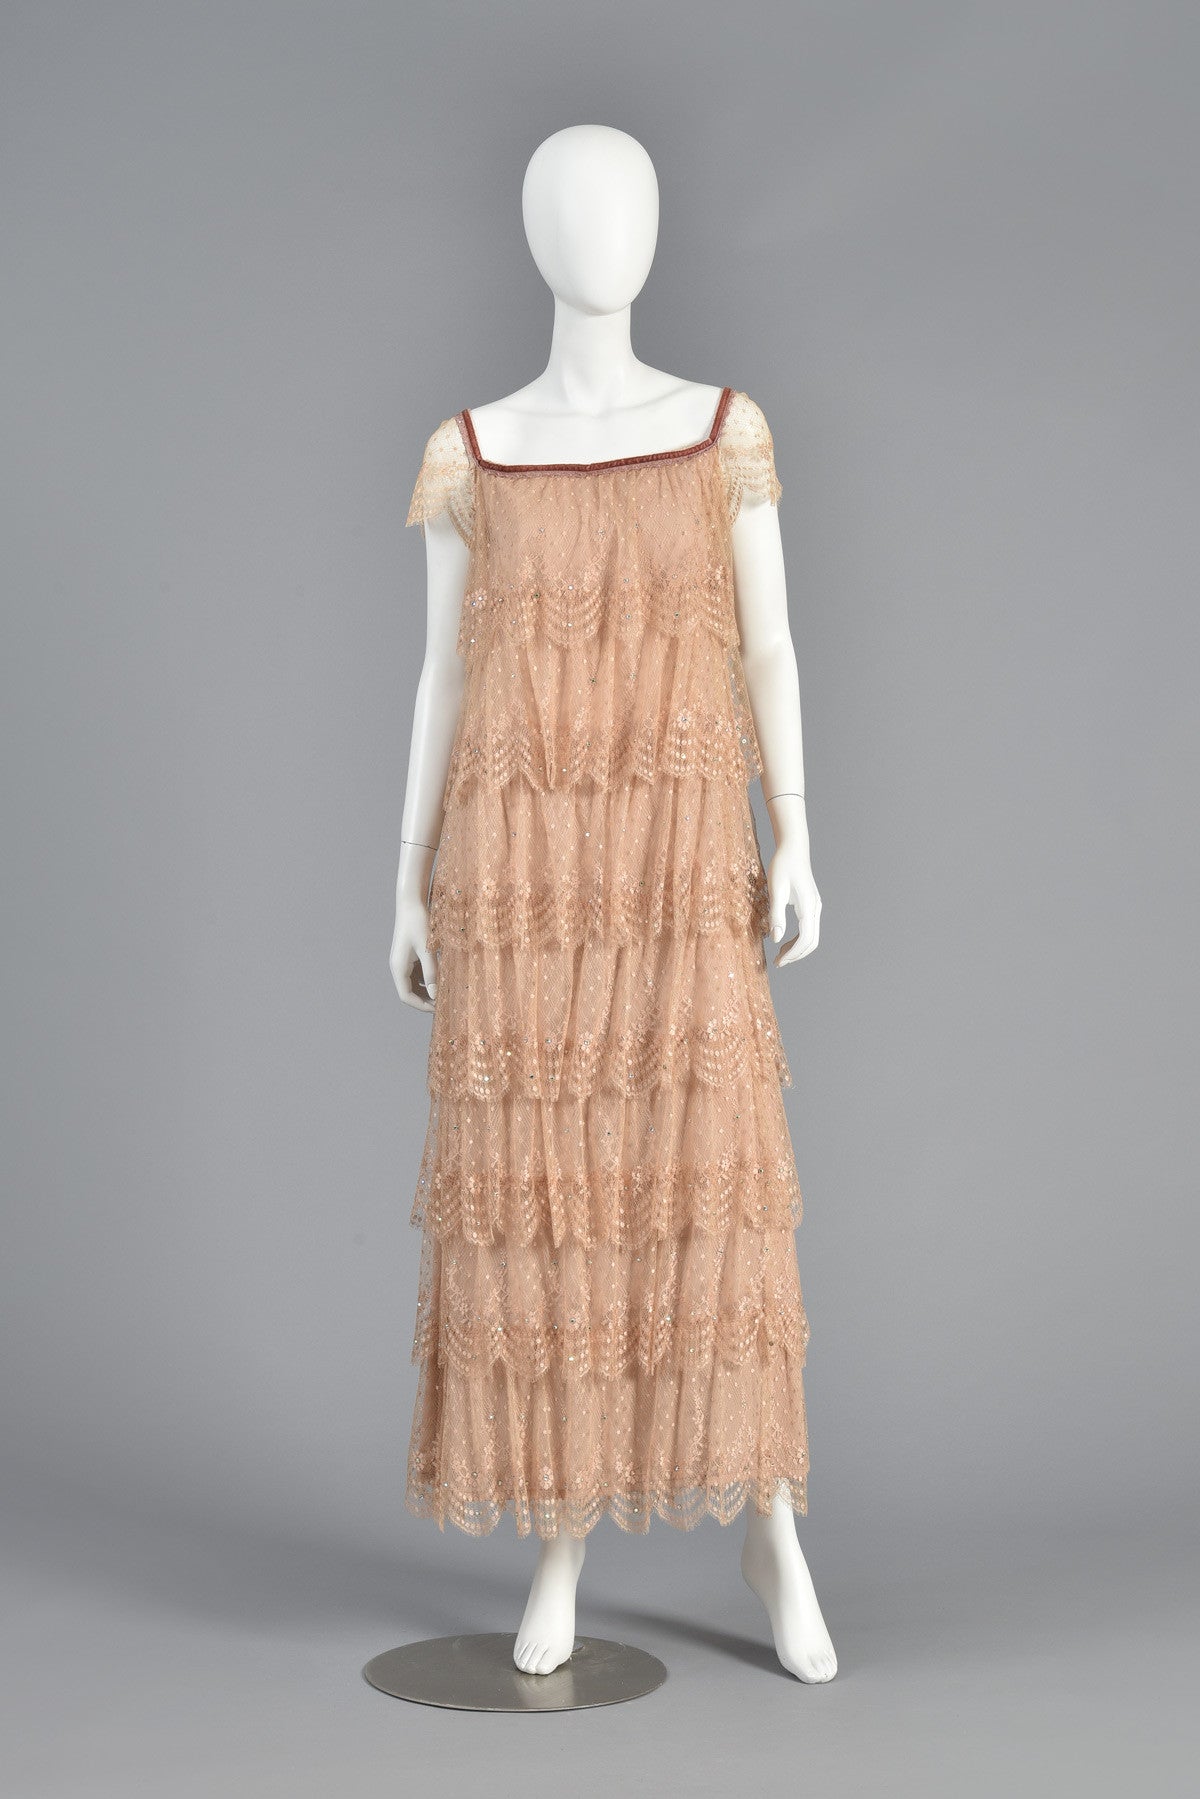 Ethereal 70s Tiered Lace Gown w/Rhinestone Accents